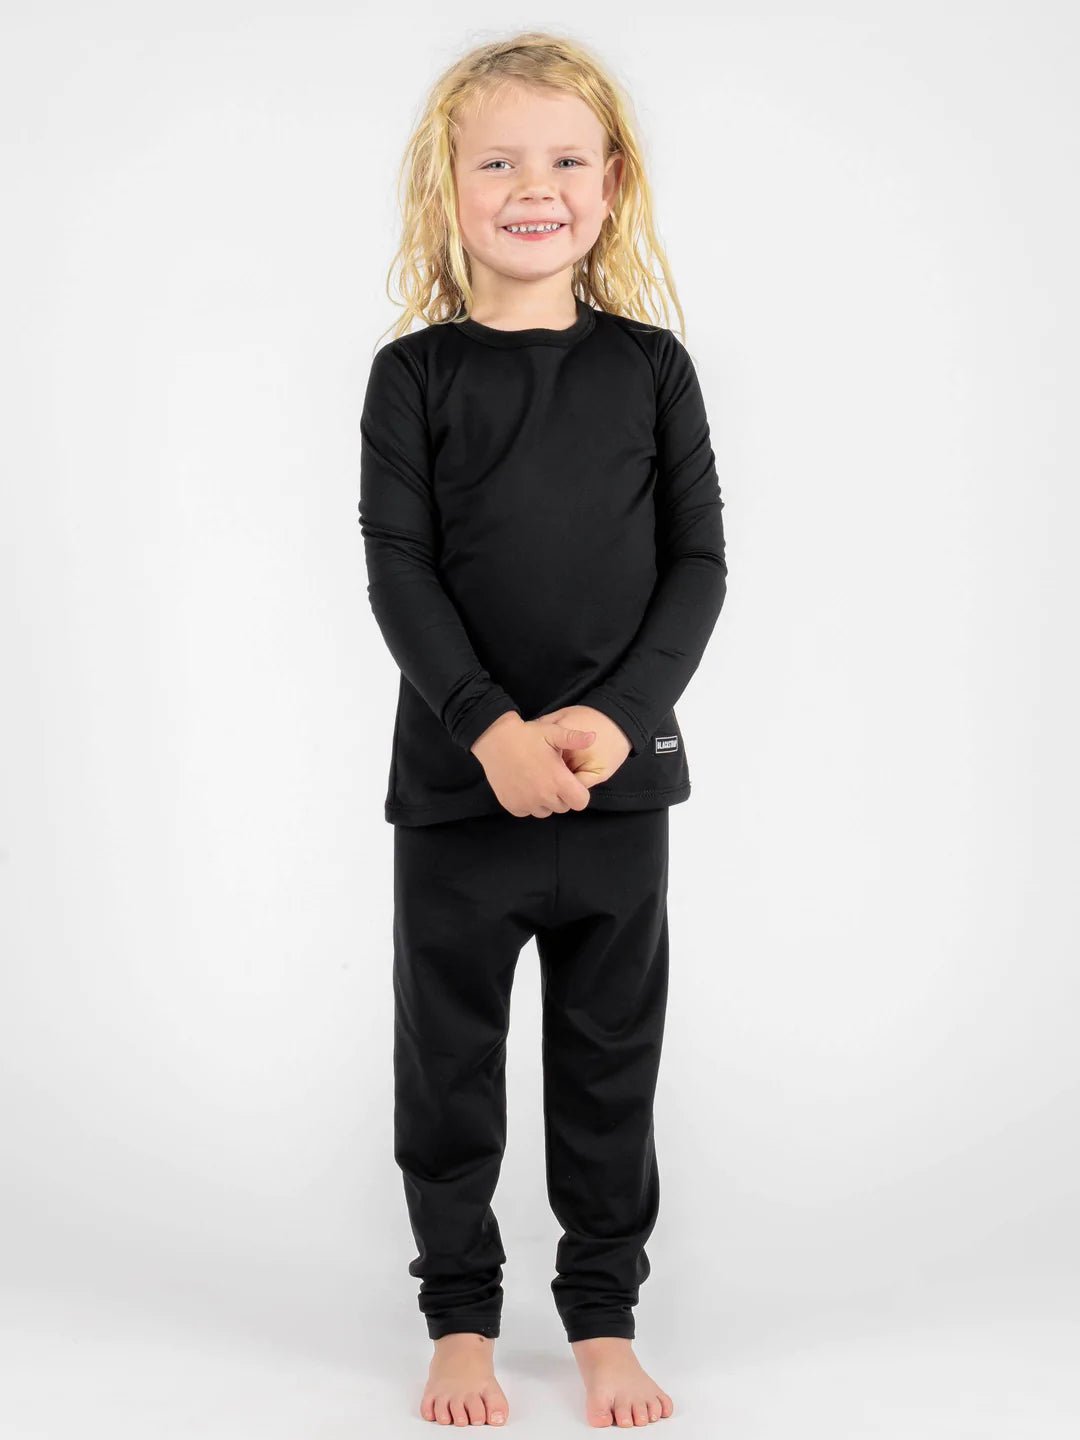 Blackstrap Kids Therma M/W Base Layer Crew 2022 - Mountain Kids Outfitters: Black, Front View